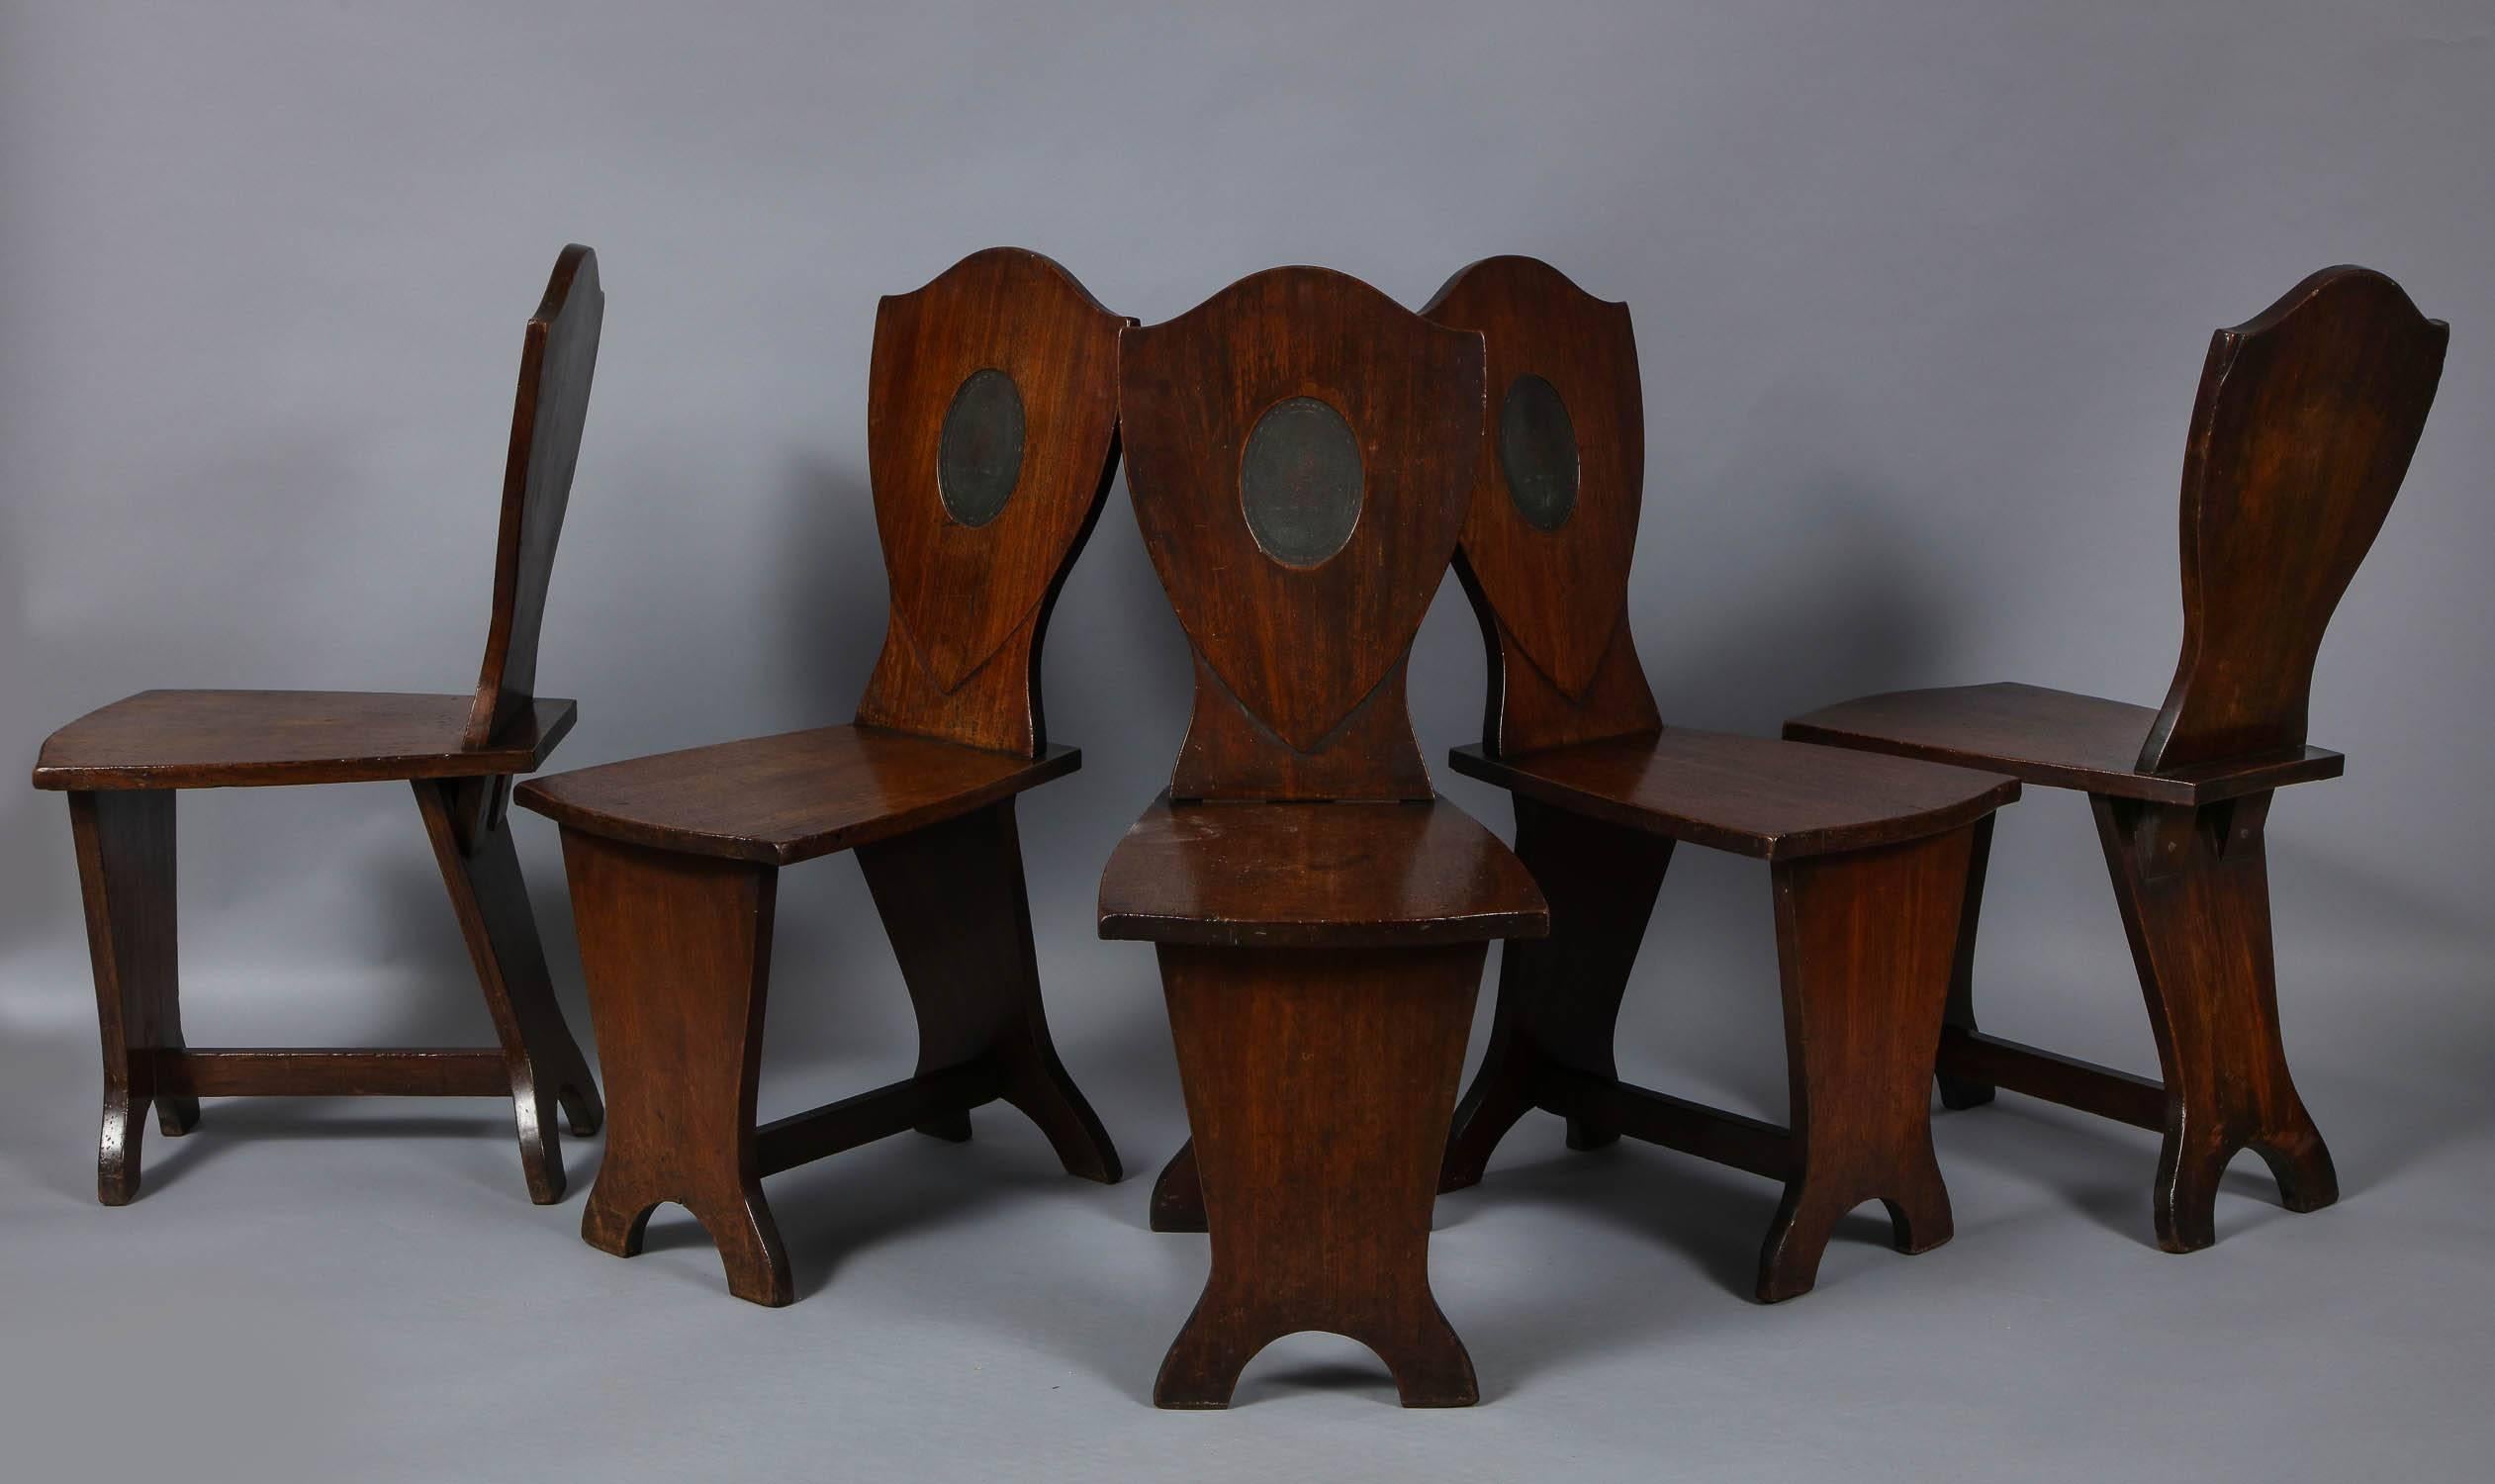 Fine set of six George III period mahogany hall chairs, the shield shaped backs with inset painted heraldic devices, on plank seats, the trestle bases with arched silhouette feet joined by cross brace, the whole with good rich color and